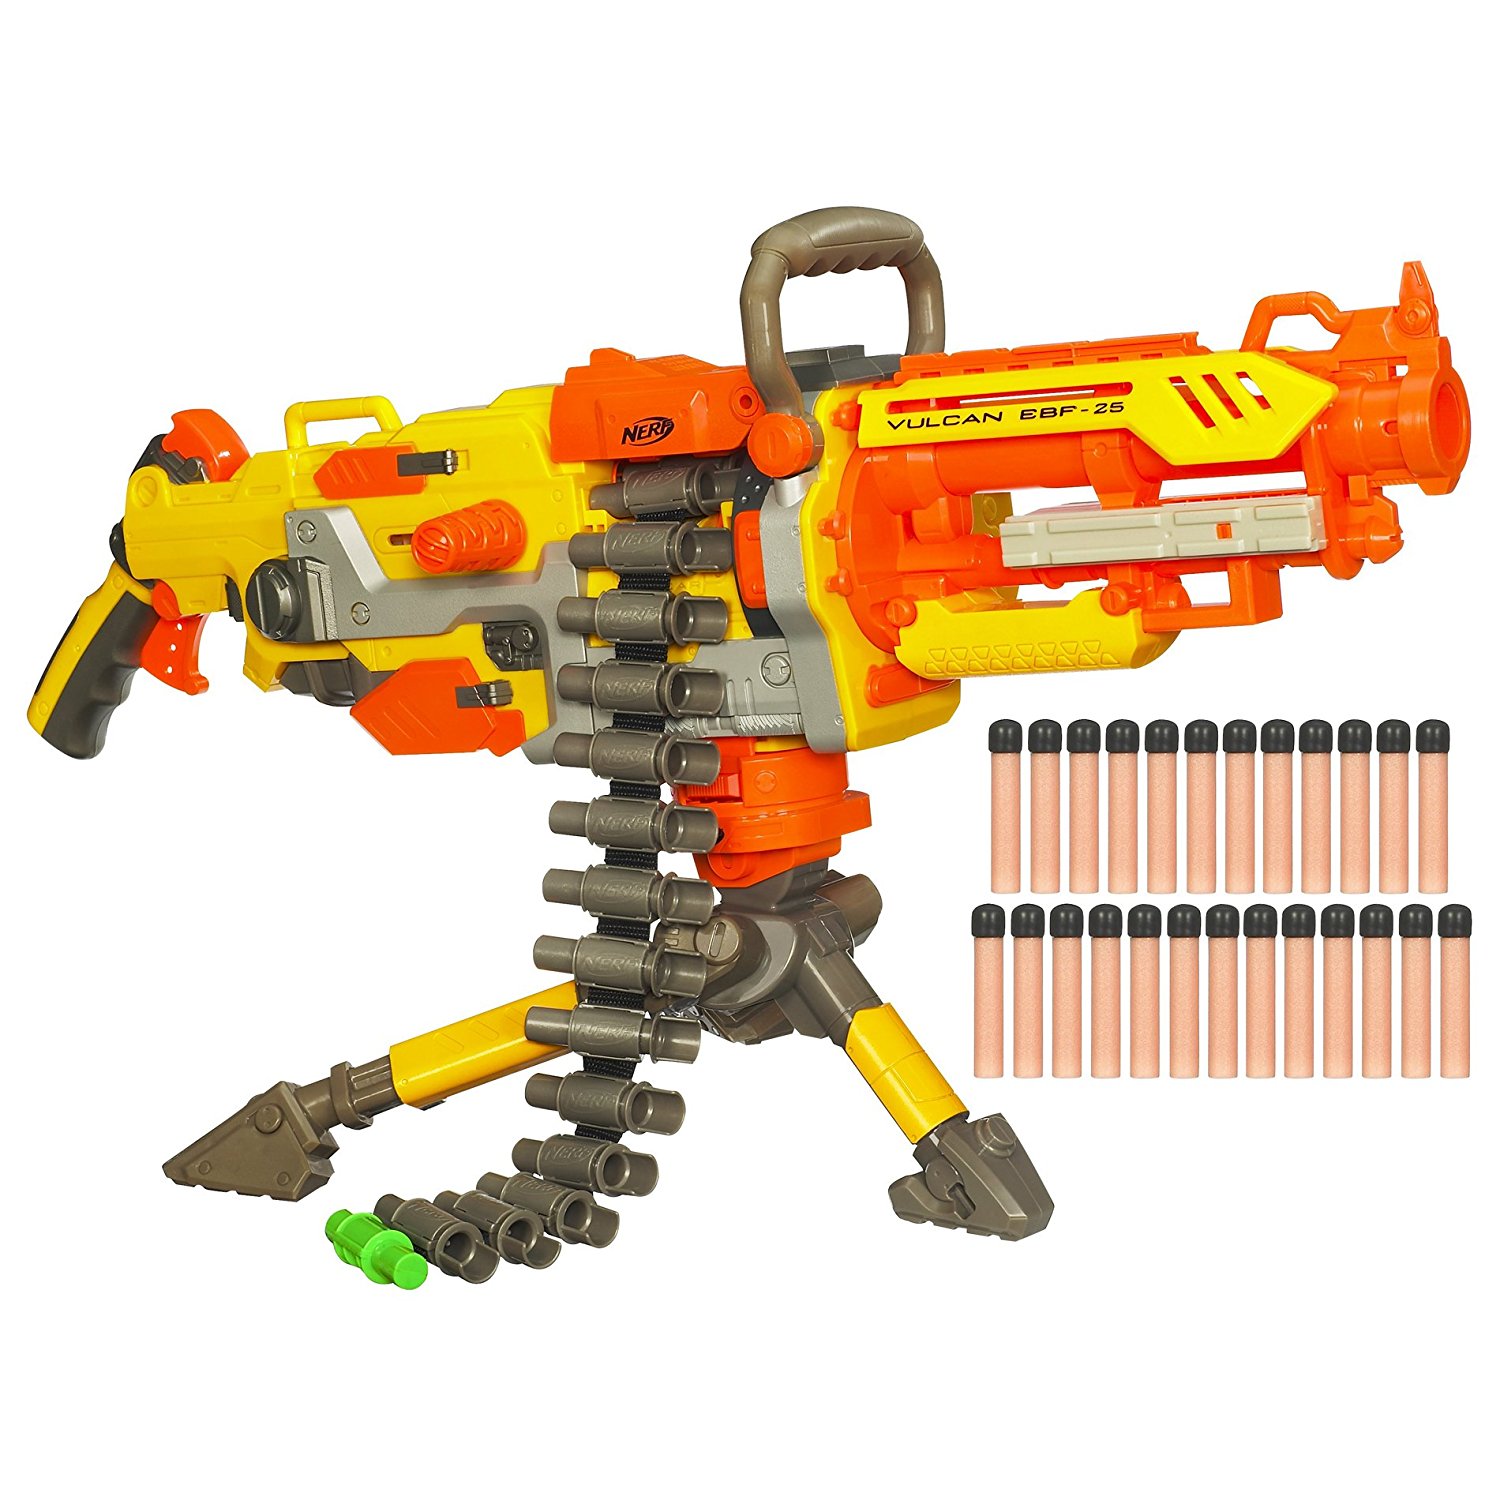 Nerf mitrailleuse pas cher - Comparatif mitrailleuse nerf